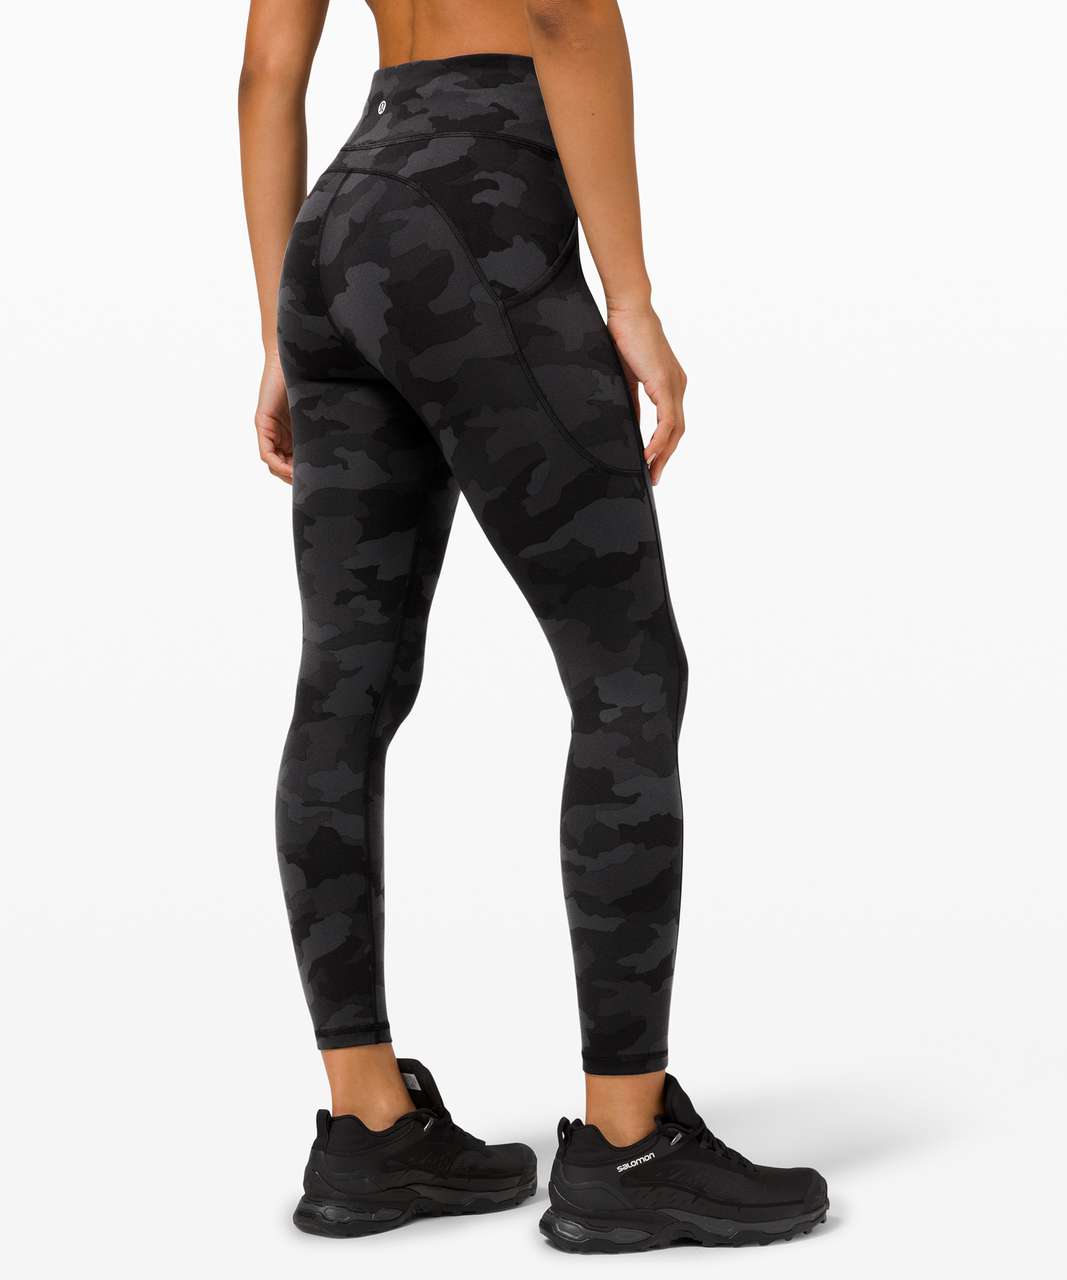 Carbon 38 High Rise 7/8 Leggings in Refreshing Camo Size XS - $41 - From  Rachel